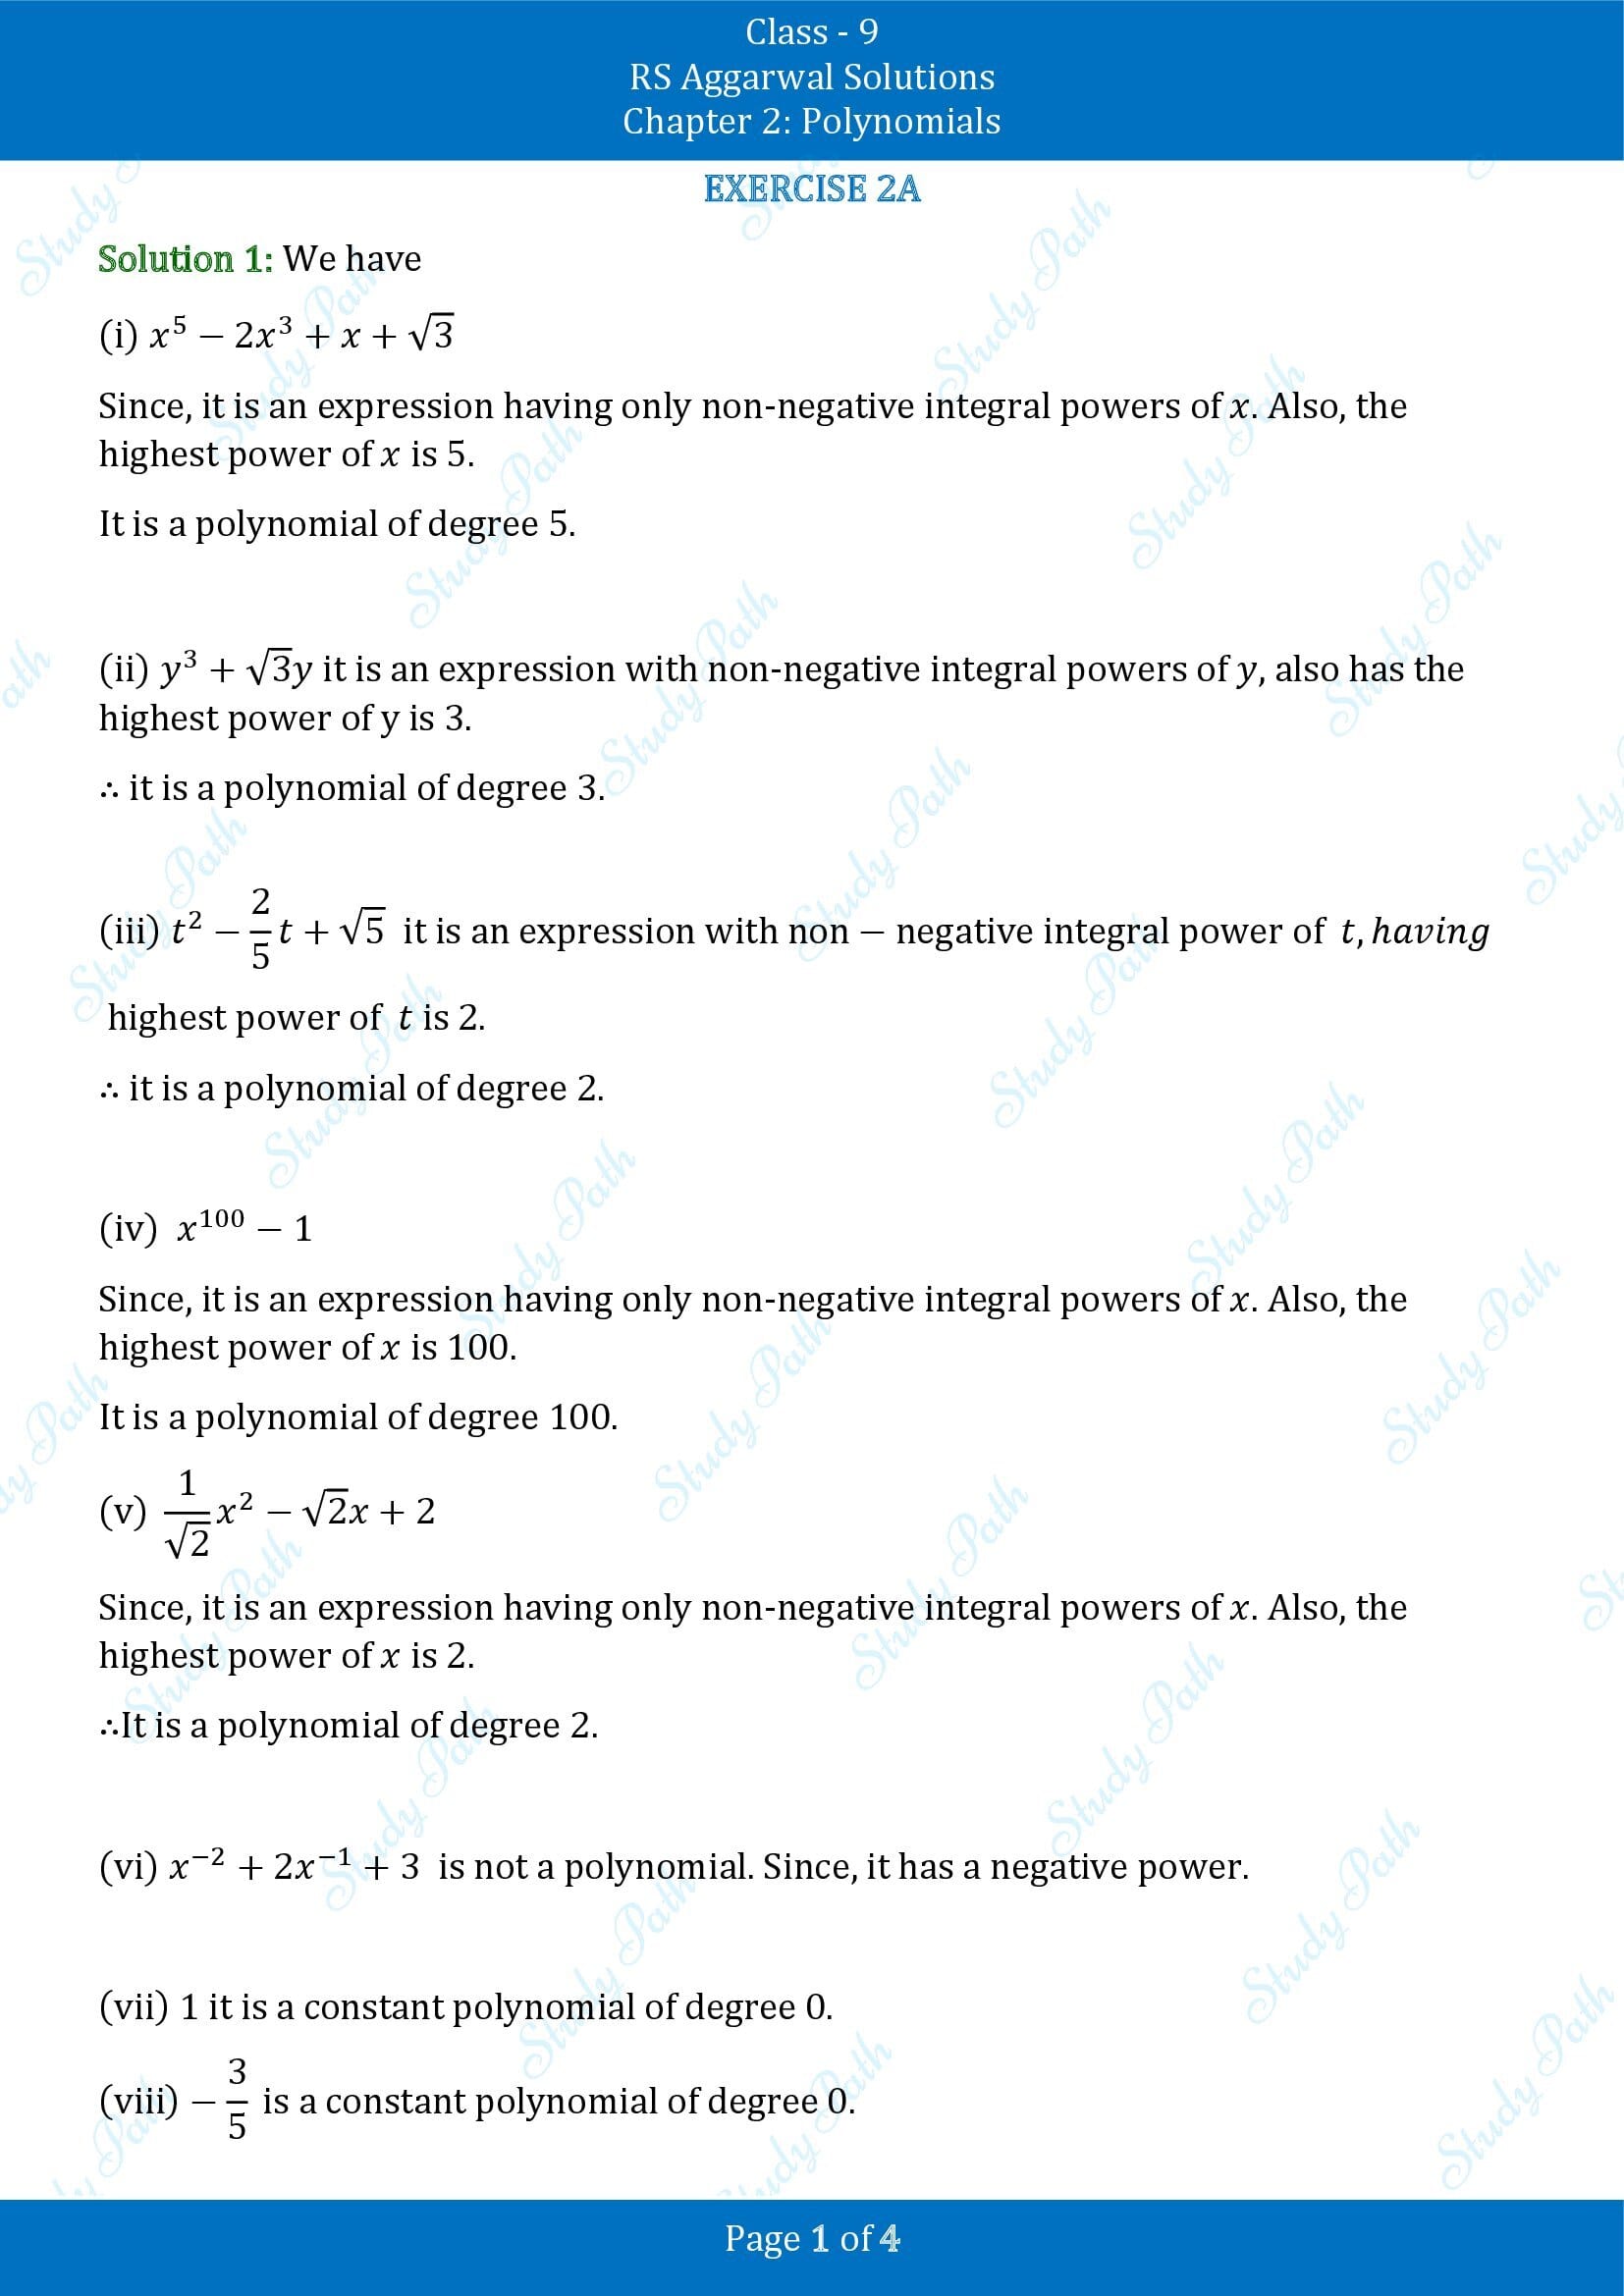 RS Aggarwal Solutions Class 9 Chapter 2 Polynomials Exercise 2A 00001